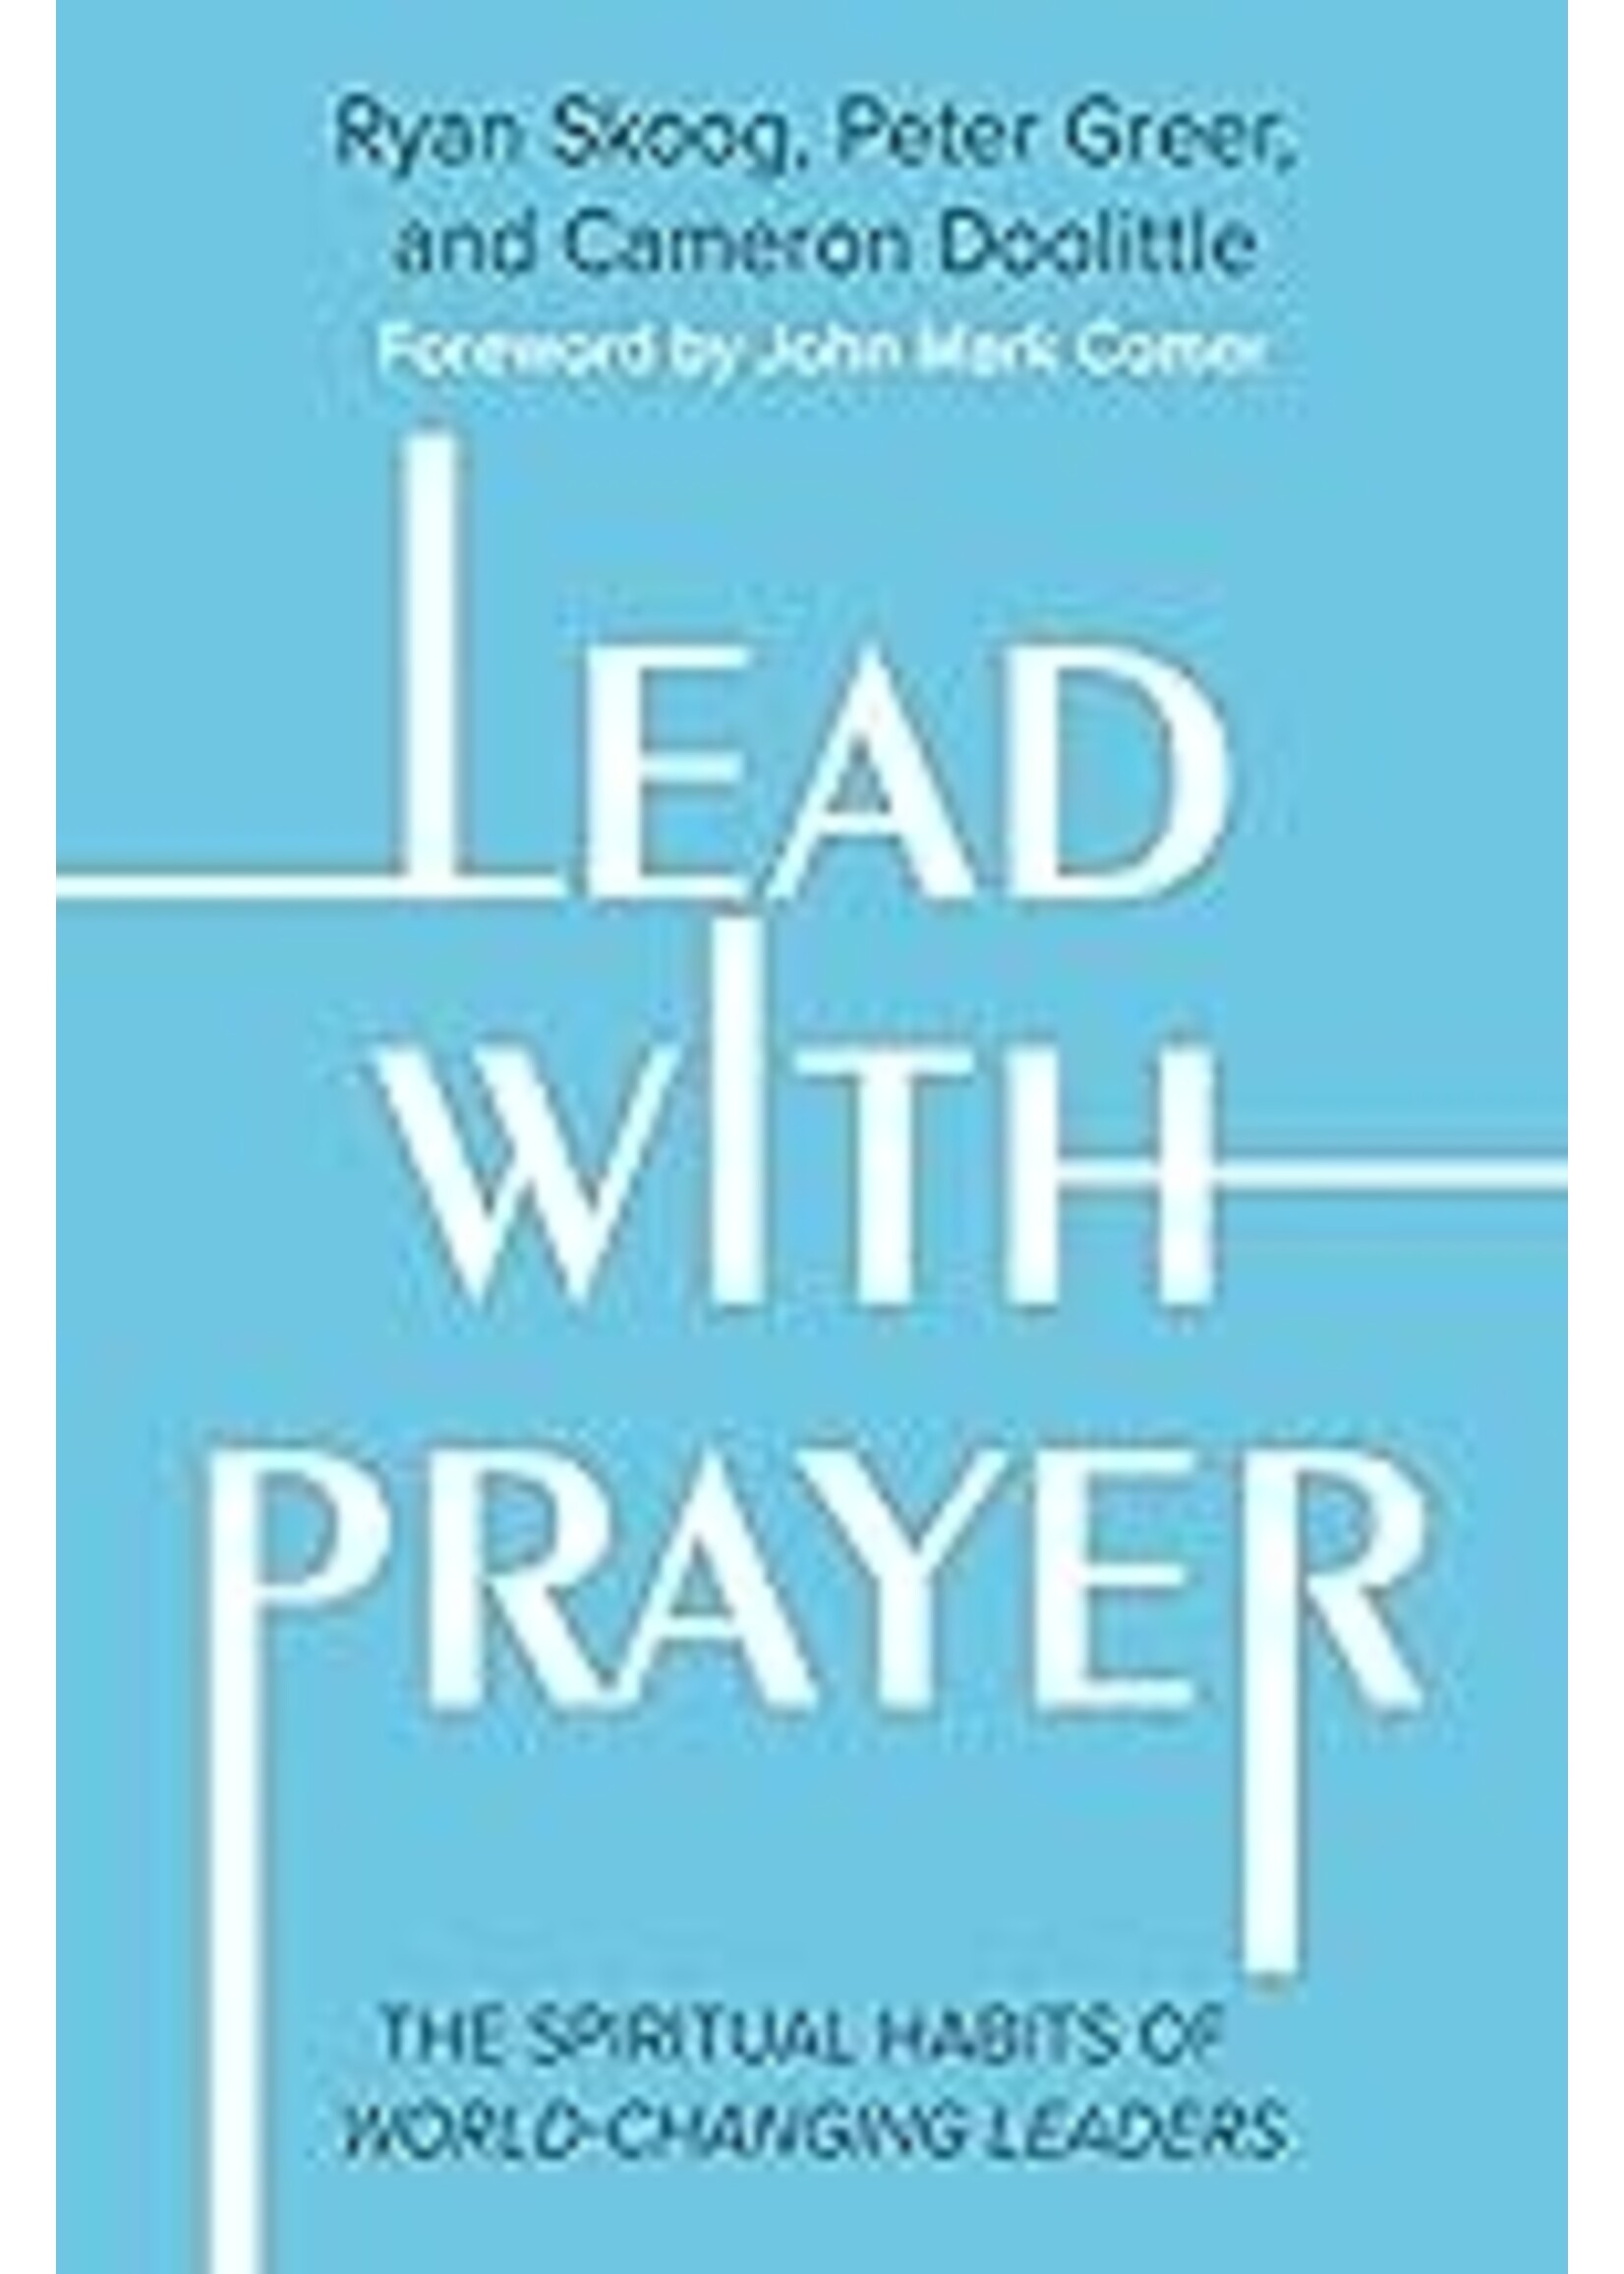 Lead With Prayer